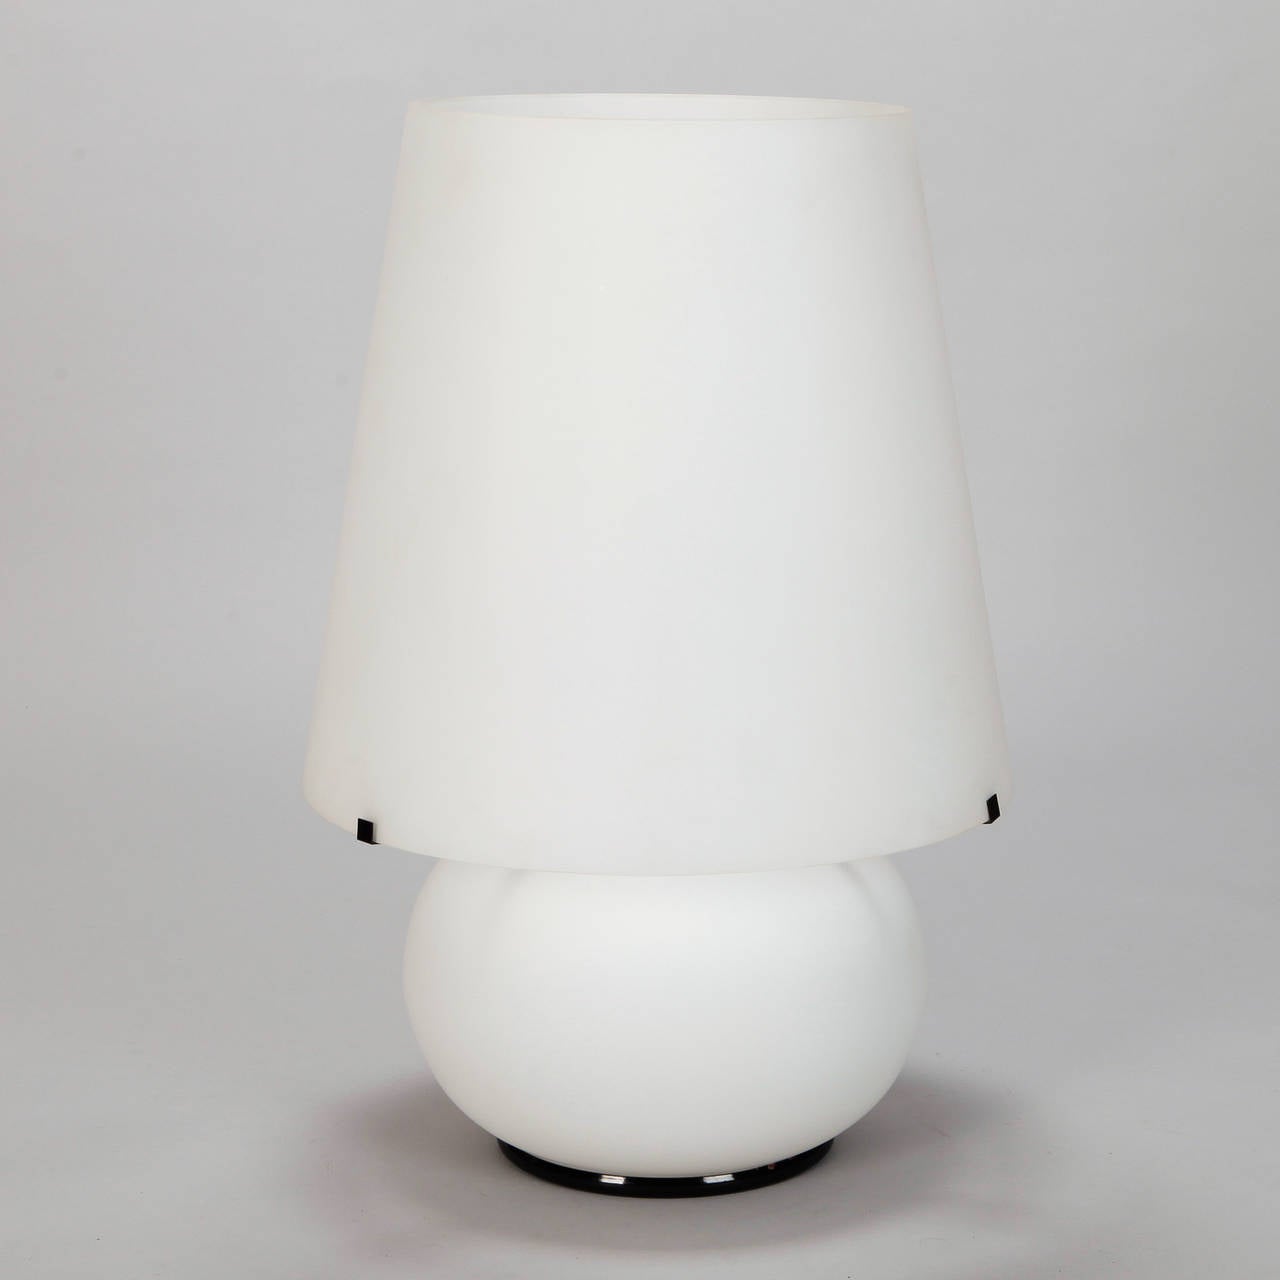 Circa 1950s large table lamp in frosted white glass with round, globe shaped body and tall, all glass shade designed by Max Ingrand for Fontana D'Arte. This extra large vintage size is no longer available.  New wiring for US electrical standards.